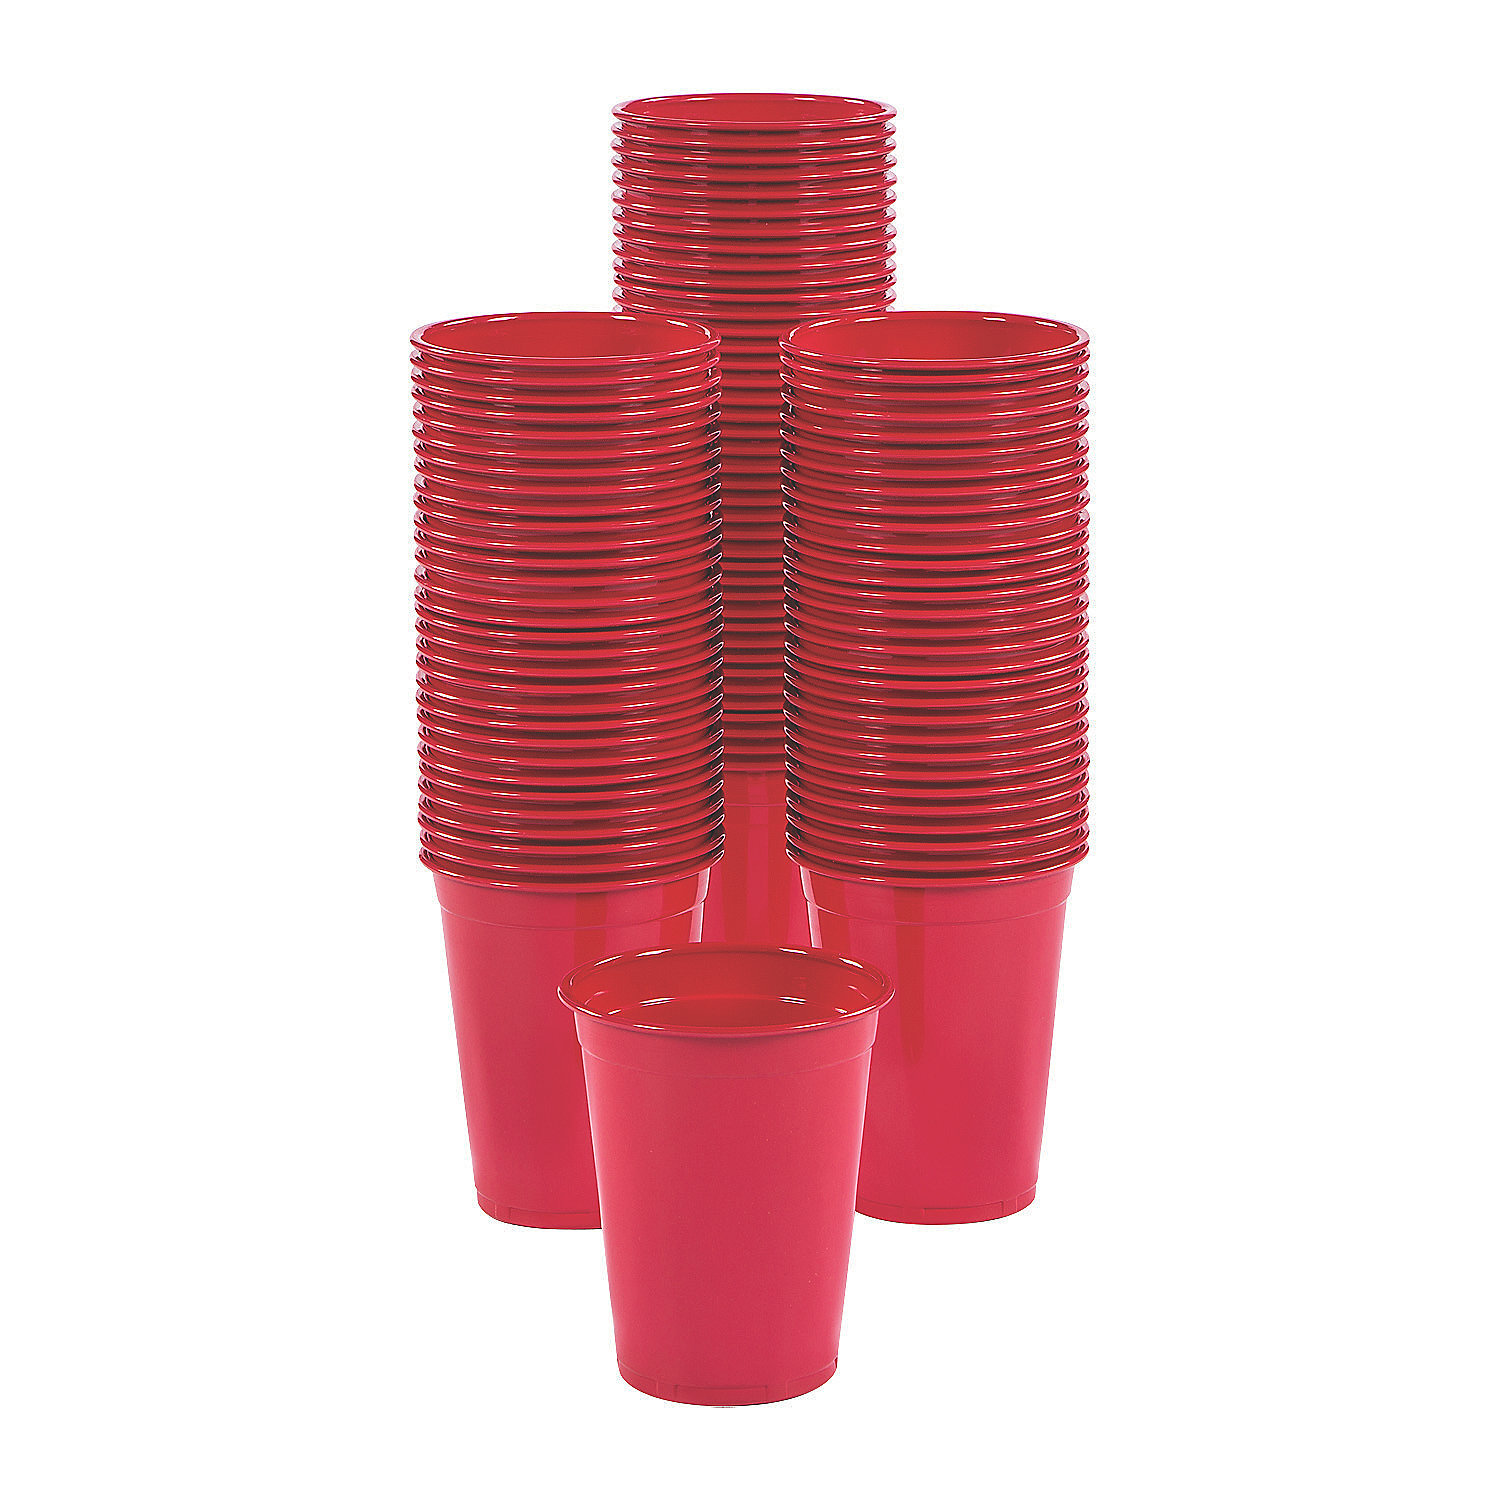 Bulk Red Plastic Cups, Party Supplies, Party, 100 Pieces